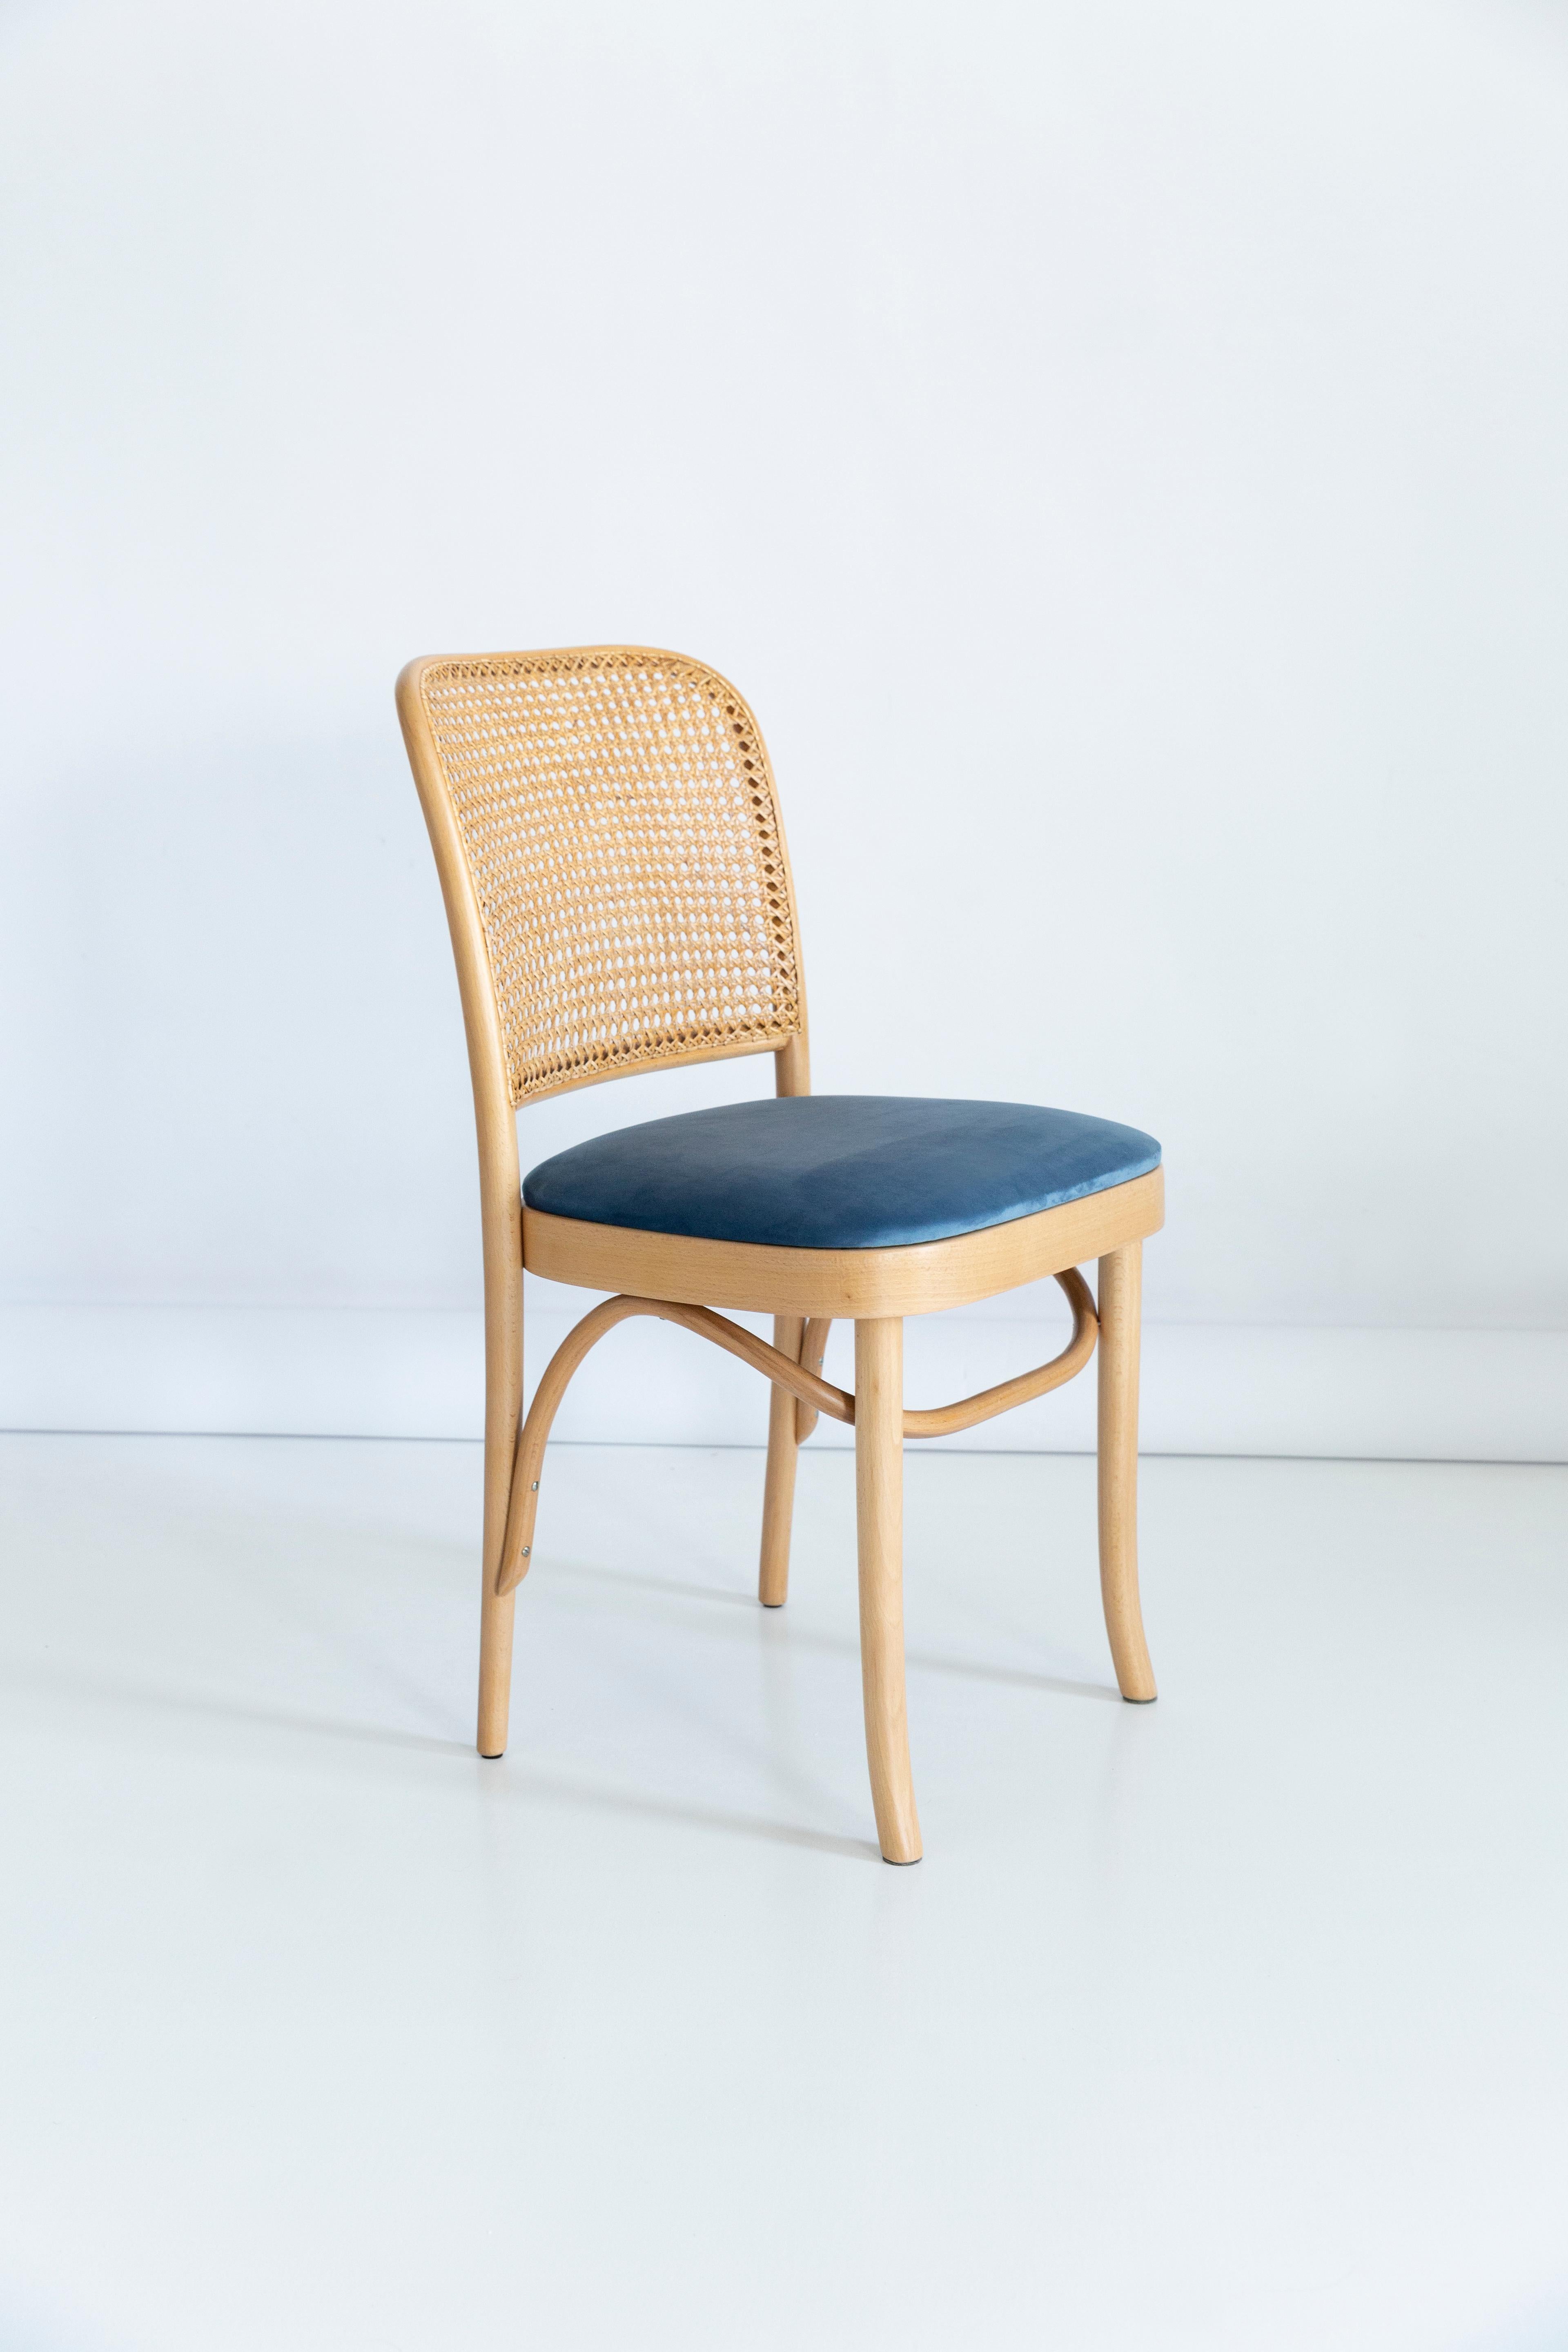 Set of Five Blue Velvet Thonet Wood Rattan Chairs, 1960s For Sale 4